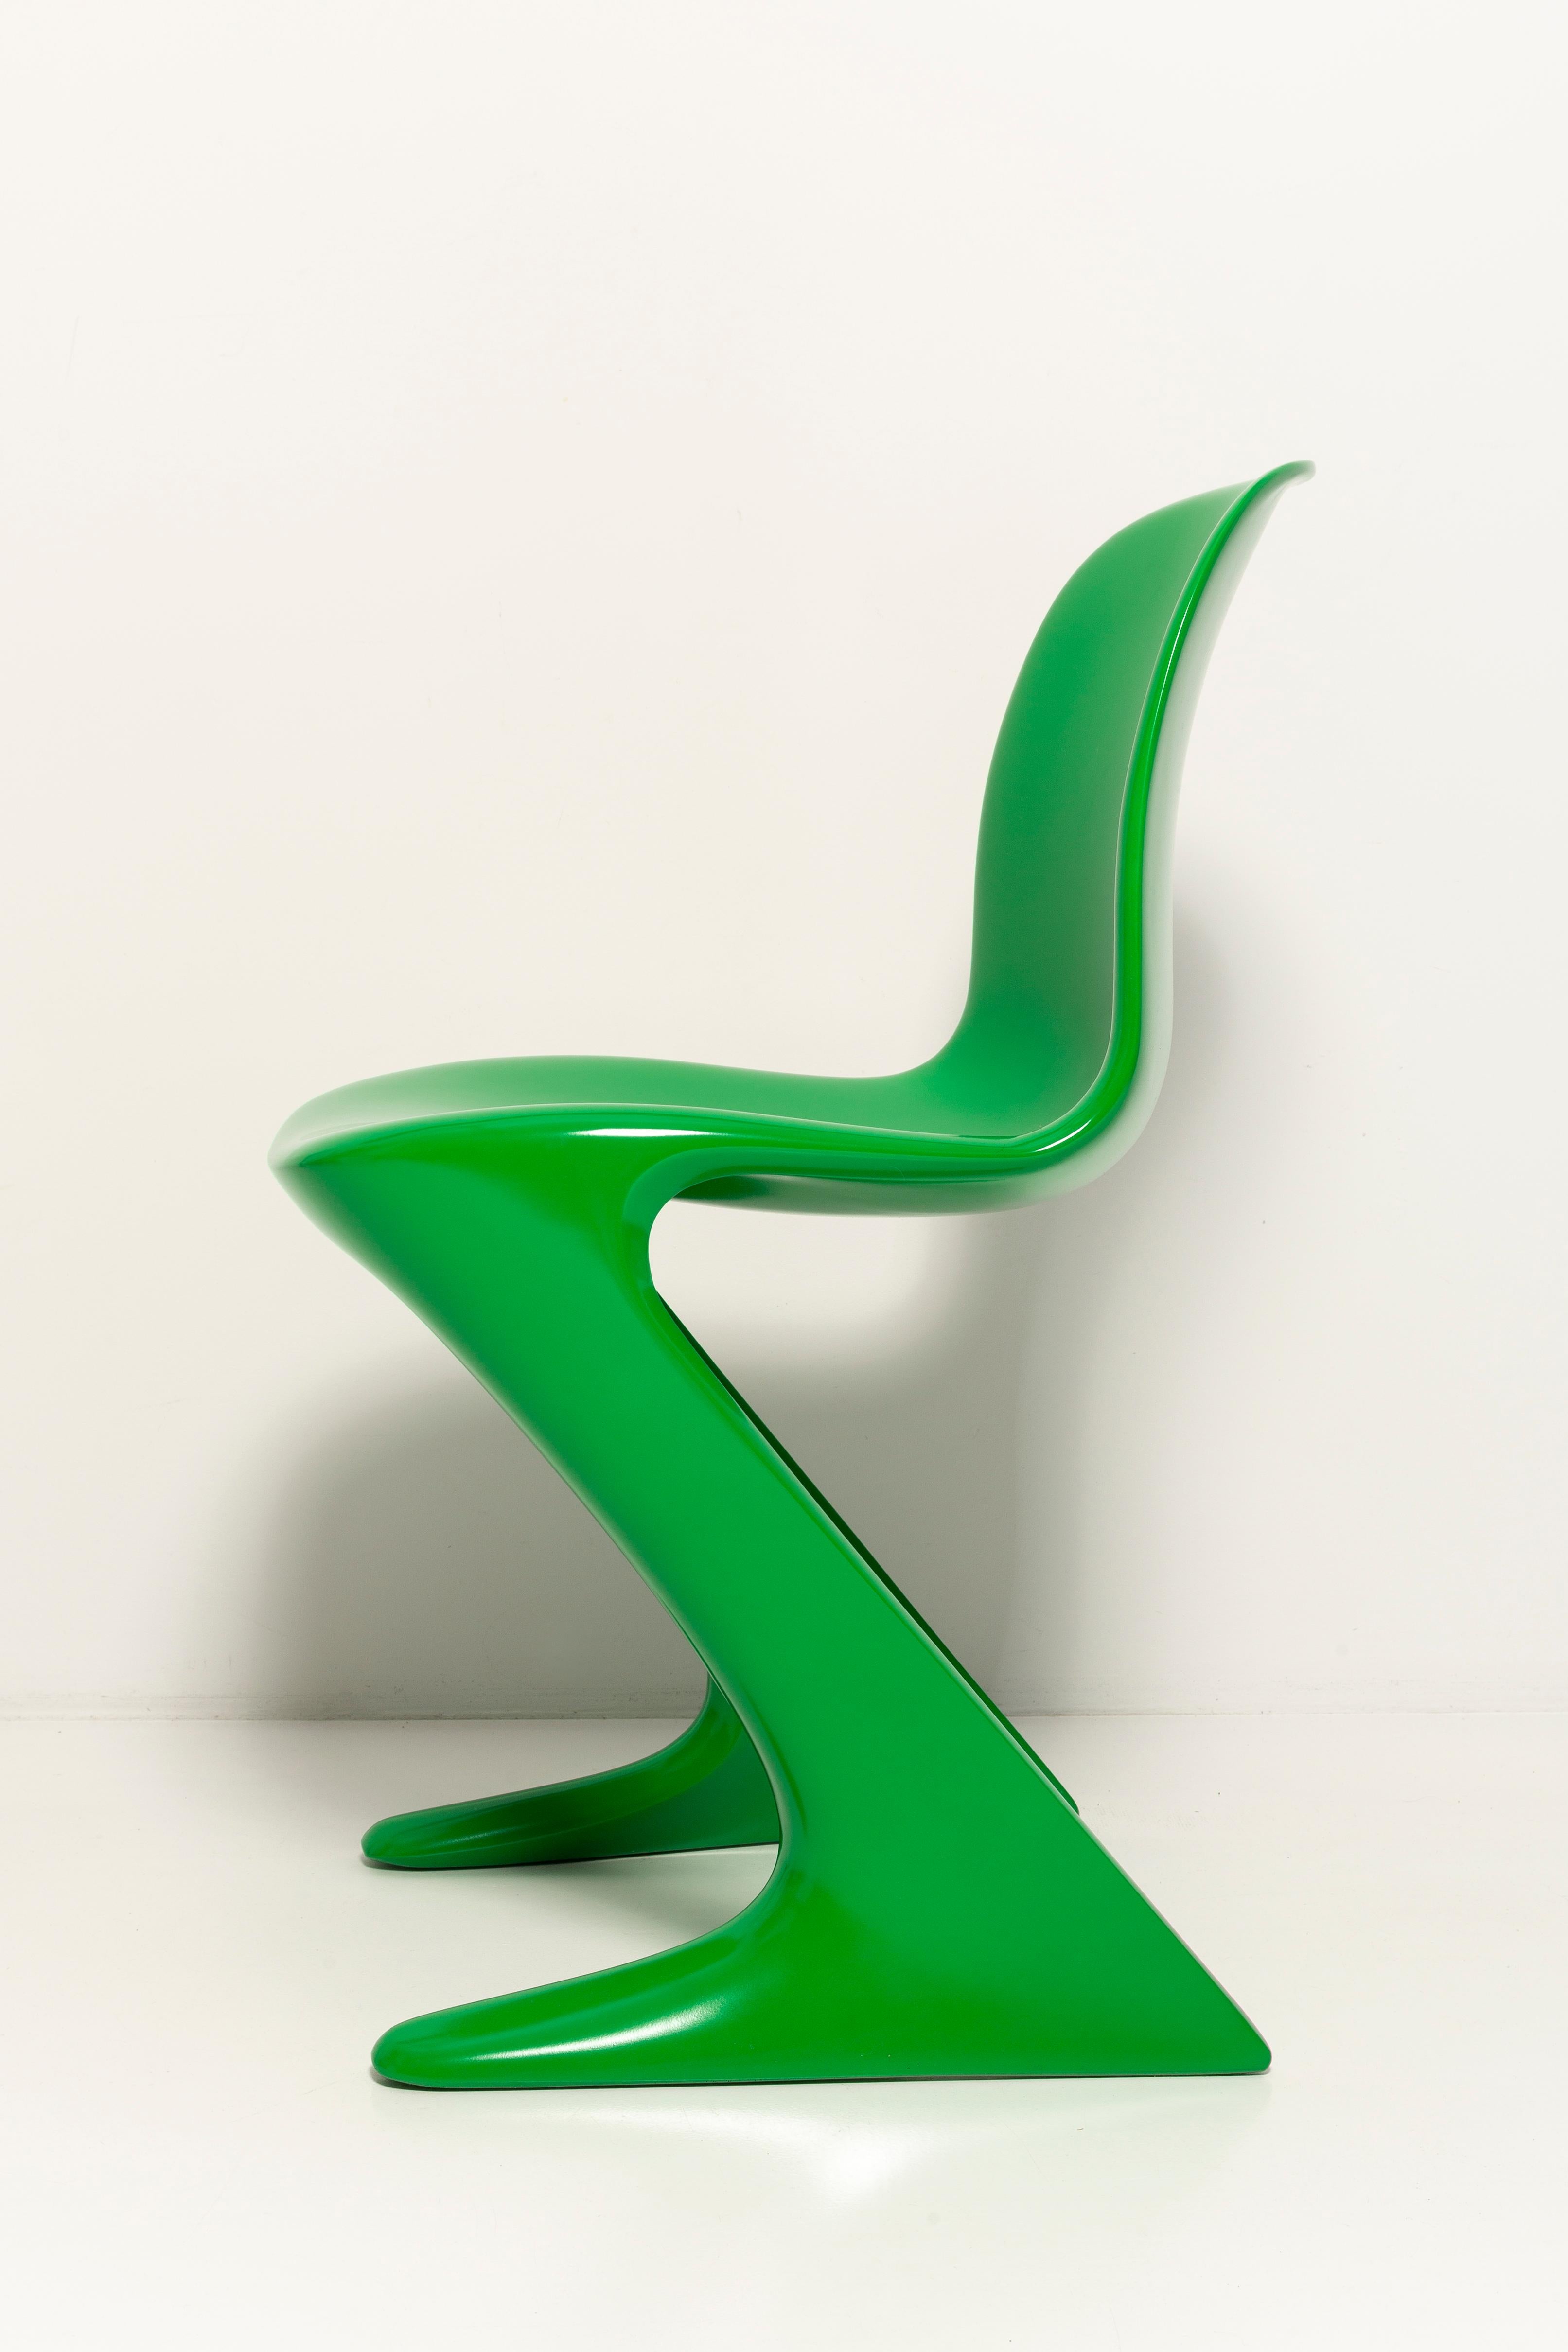 Set of Four Green Kangaroo Chairs Designed by Ernst Moeckl, Germany, 1960s For Sale 1